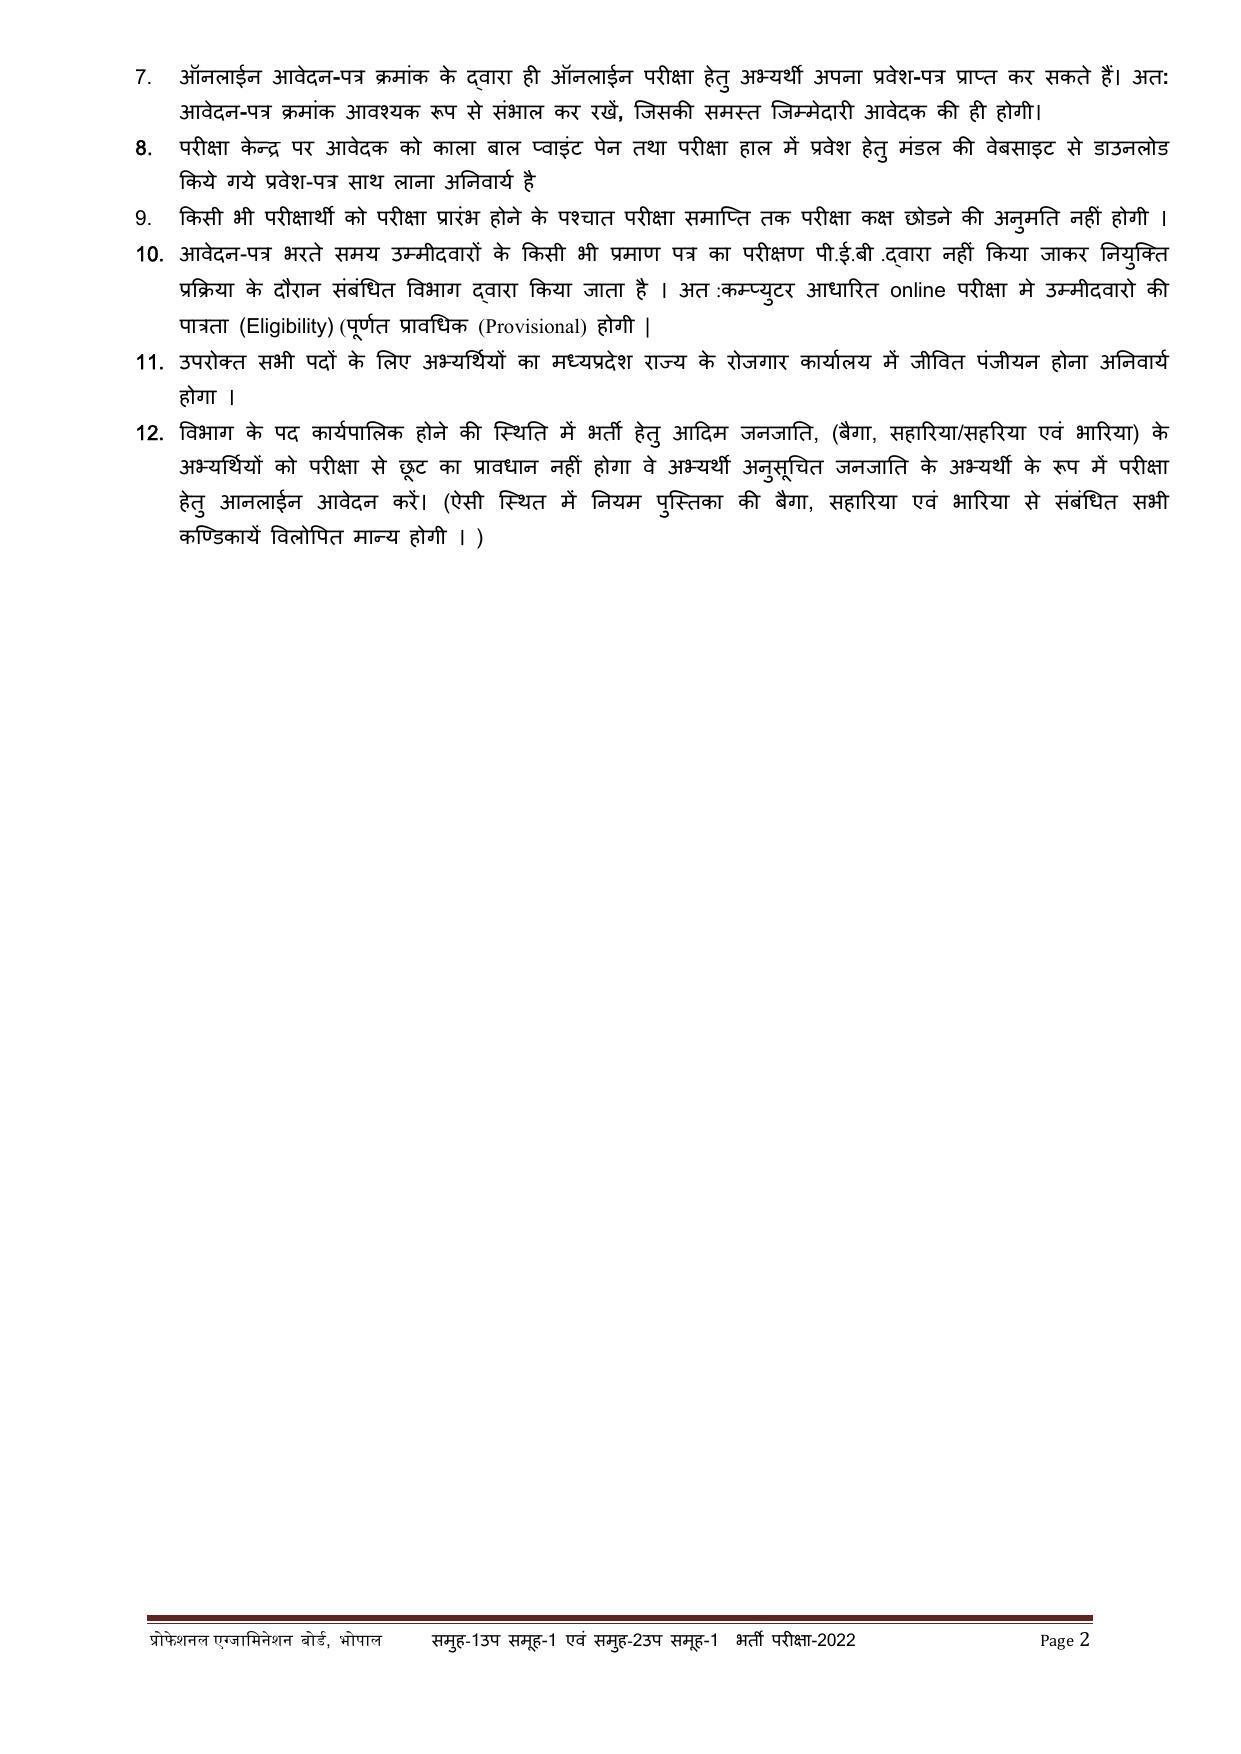 MPPEB Group-I Sub Group-I & Group-II Sub Group-I Recruitment 2022 - Page 16